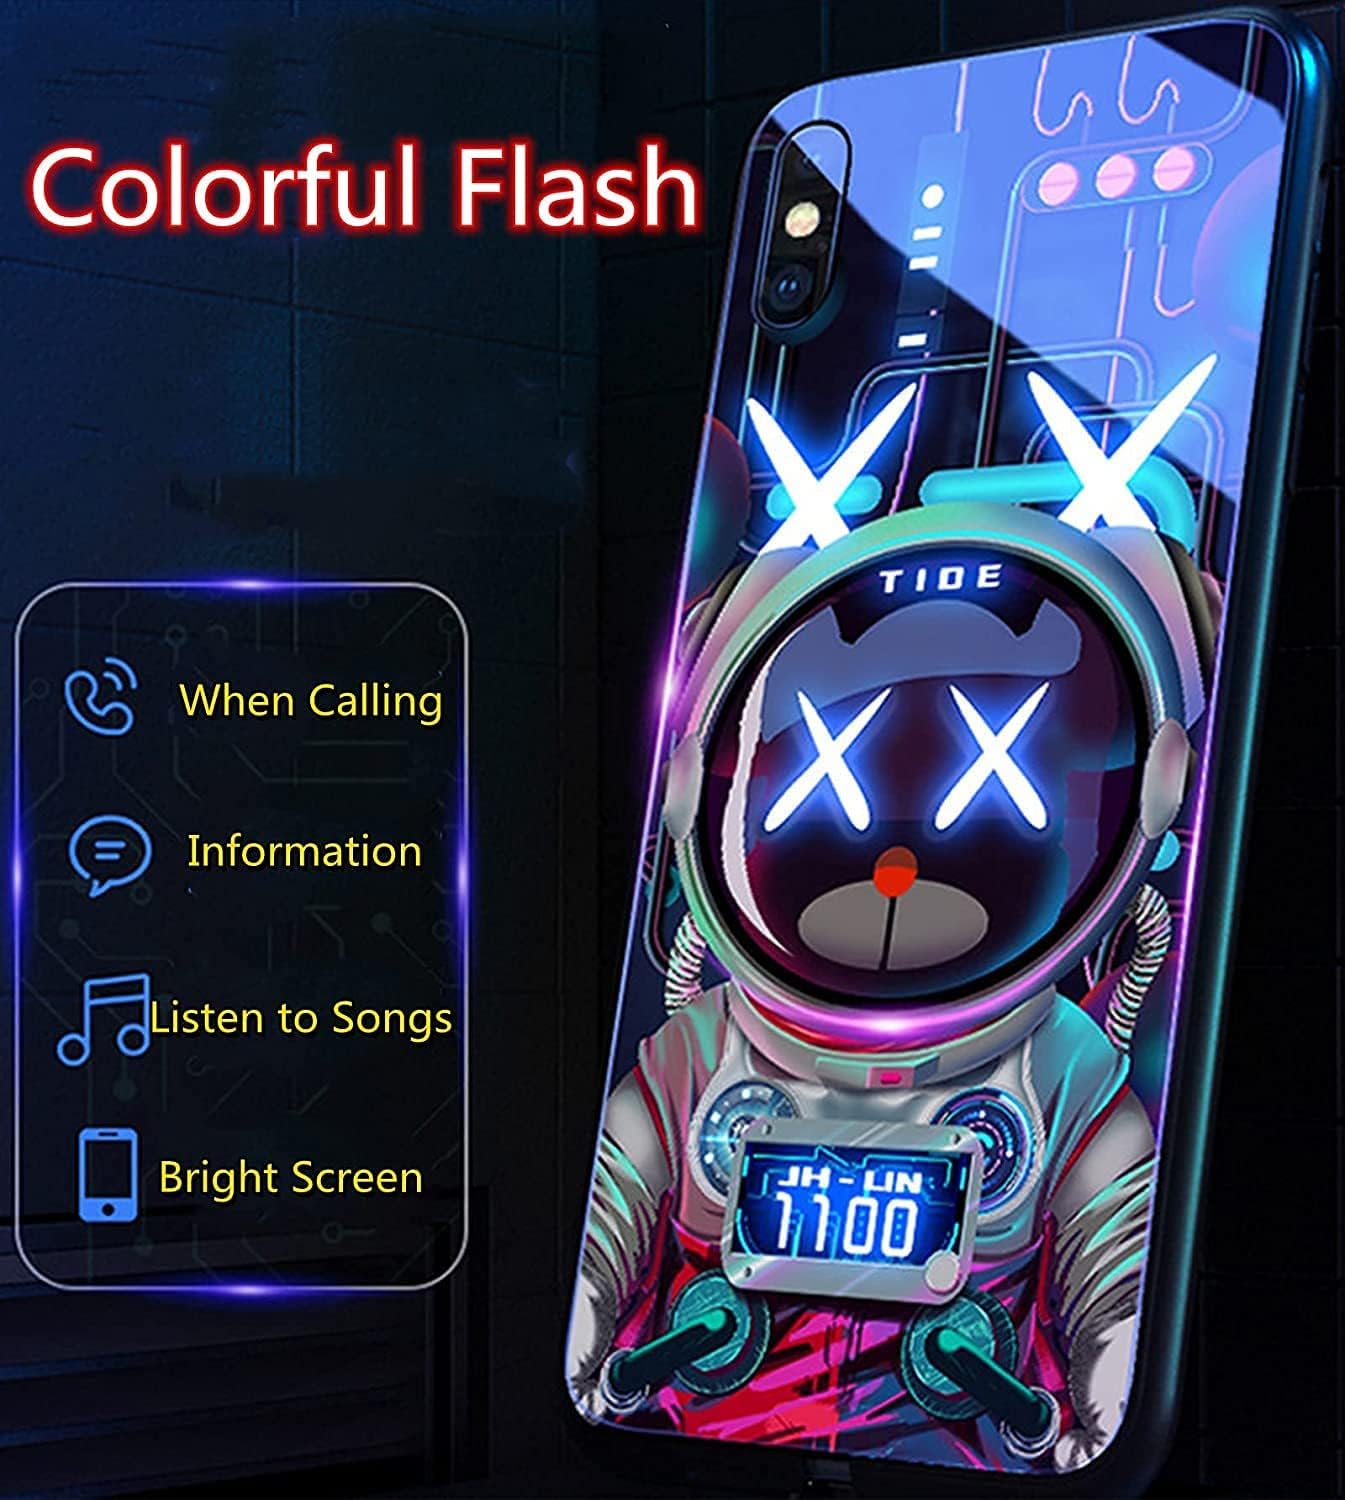 Colorful Luminous Tempered GlassMobile Phone Protective case,A Personalized Phone Case Specially Designed